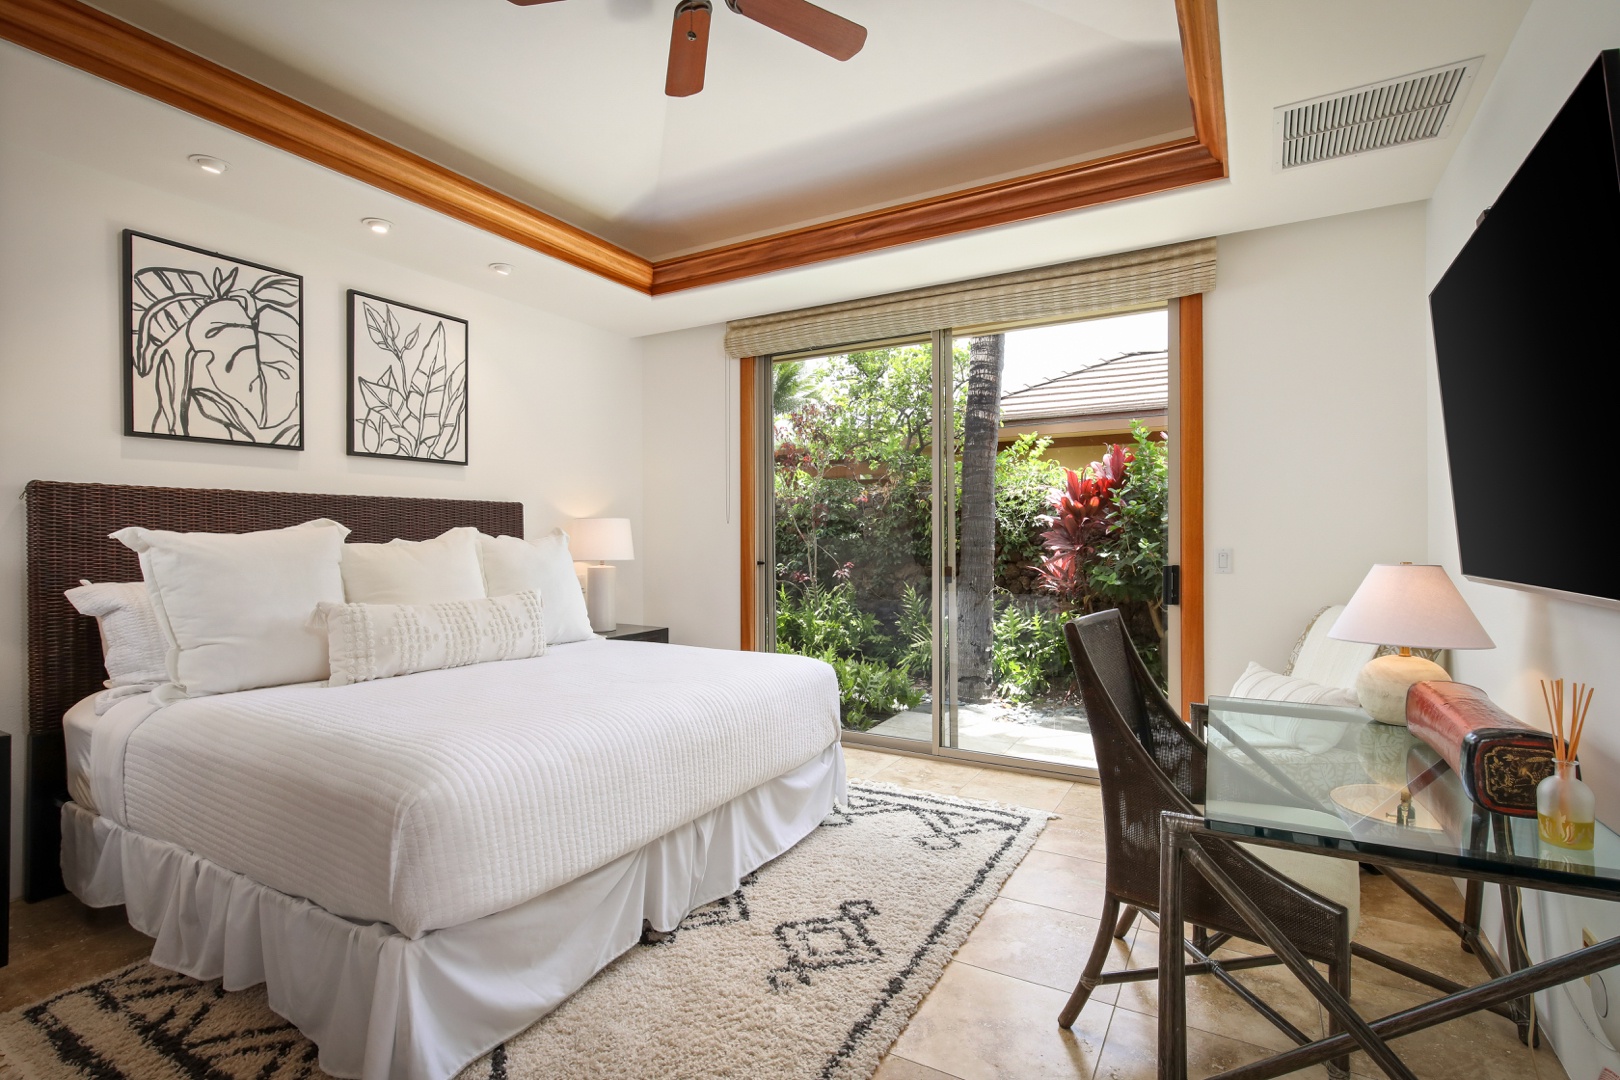 Kailua Kona Vacation Rentals, 4BD Pakui Street (147) Estate Home at Four Seasons Resort at Hualalai - Guest Suite #3 with king bed, outdoor access, television and a dedicated full bath just outside the door.